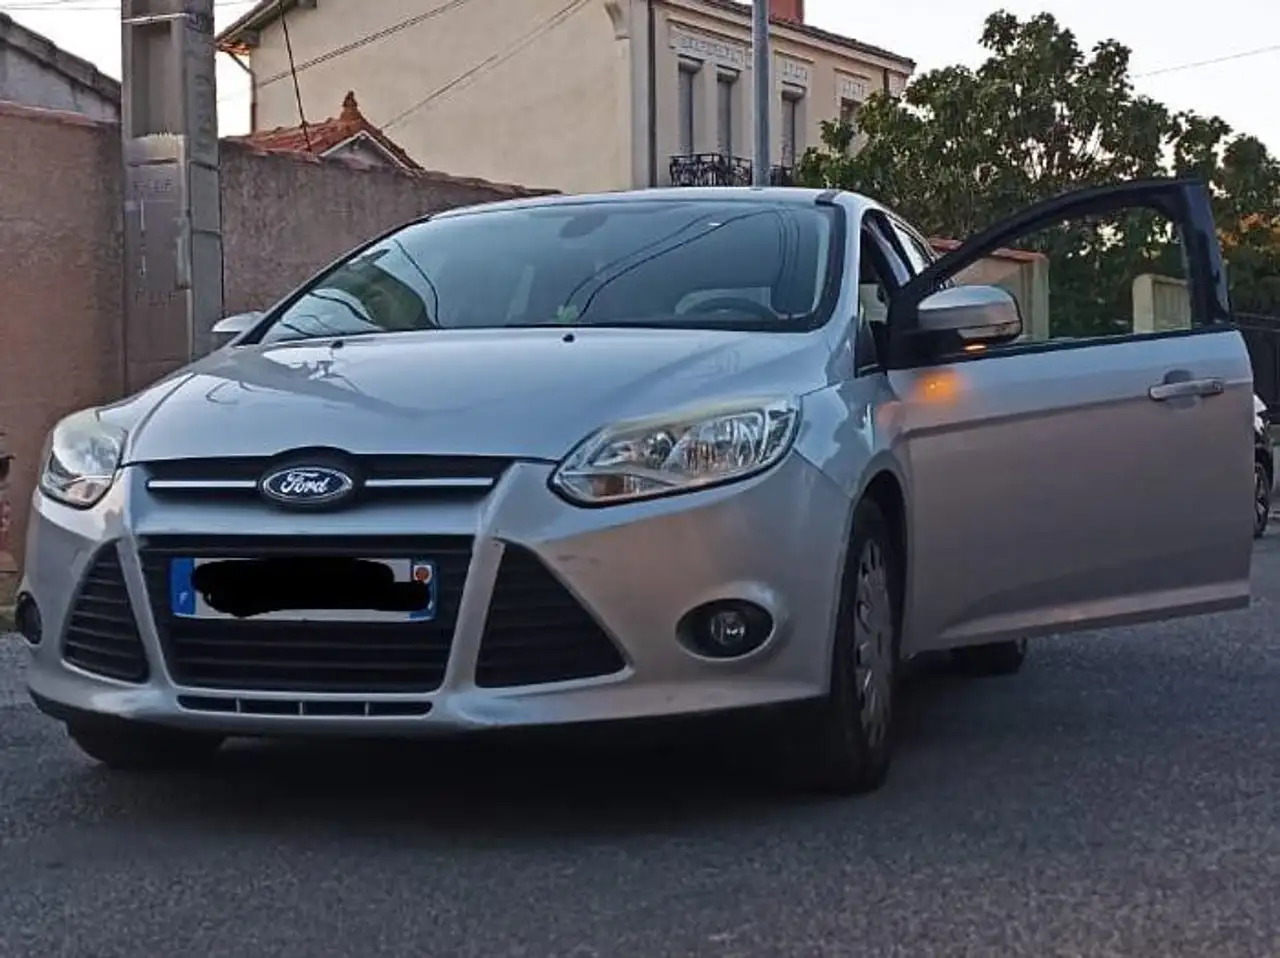 Ford Focus SW 1.6 TDCi 105 ECOnetic Technology 88g 